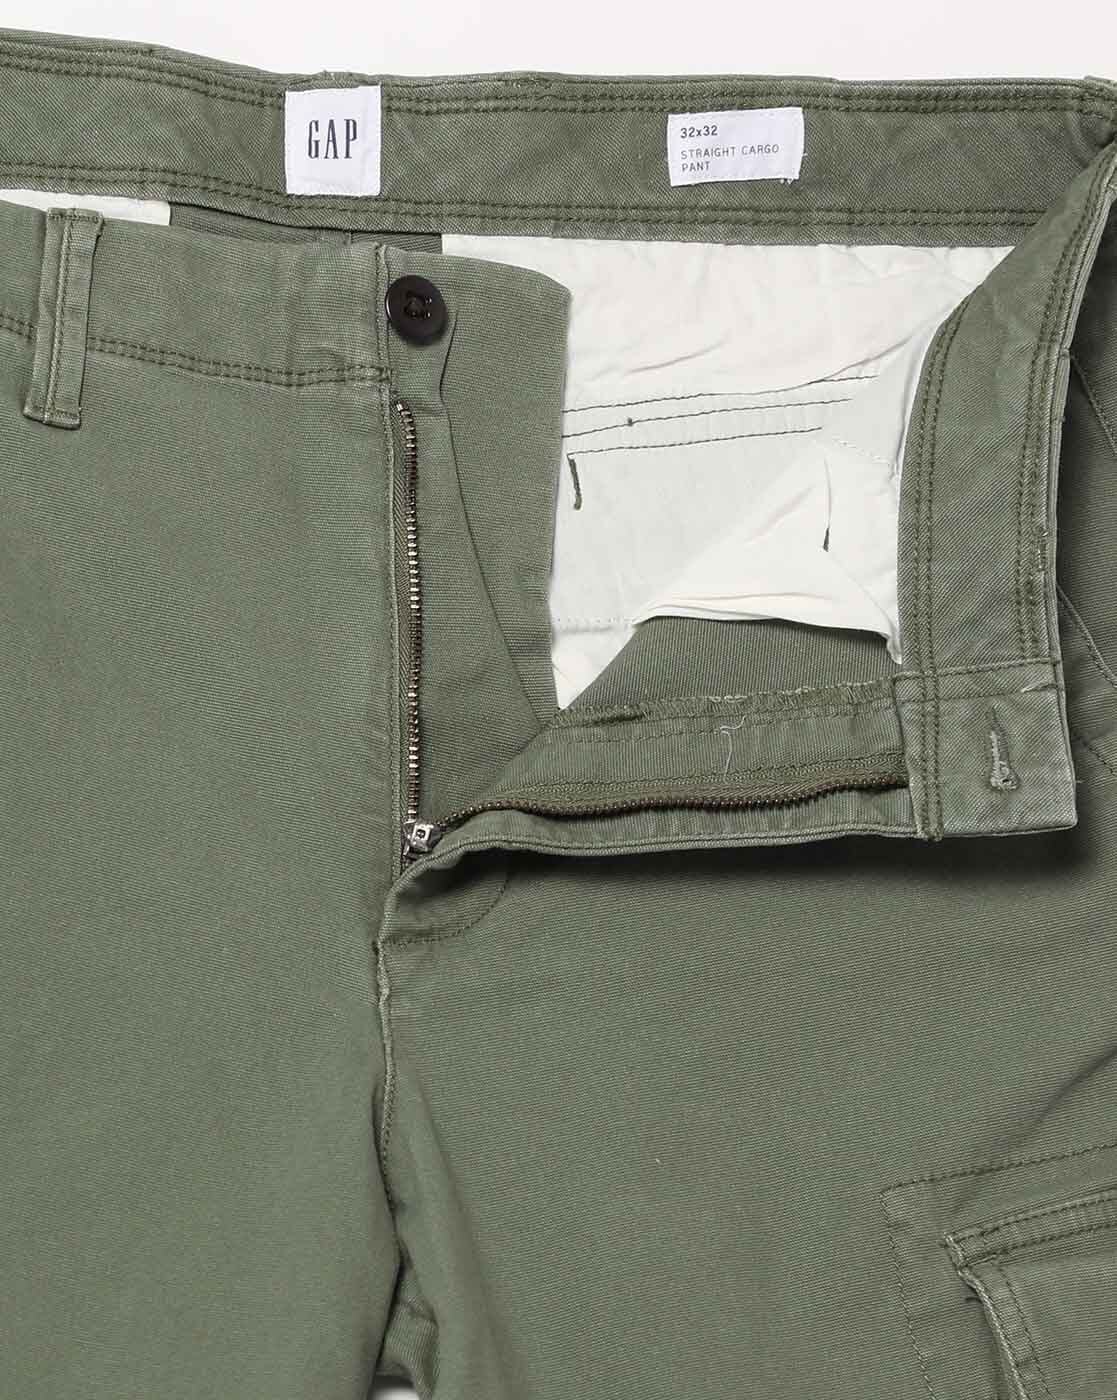 SOLD Cargo pant #1005 @gap cargo pants Baggy fit 💯 Quality and condition  ❤️‍🔥 Waist-32-34